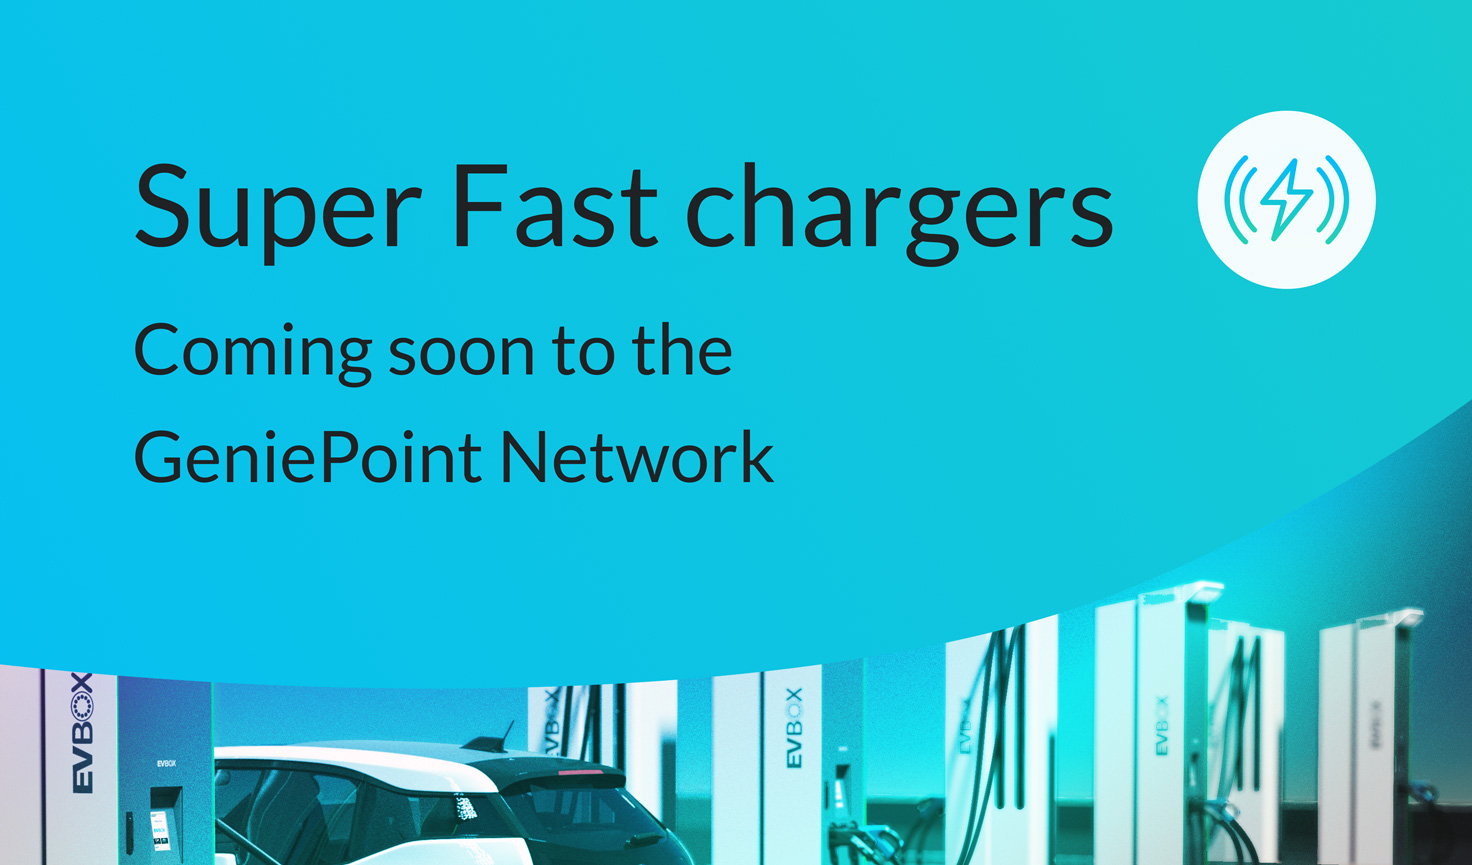 Super fast chargers